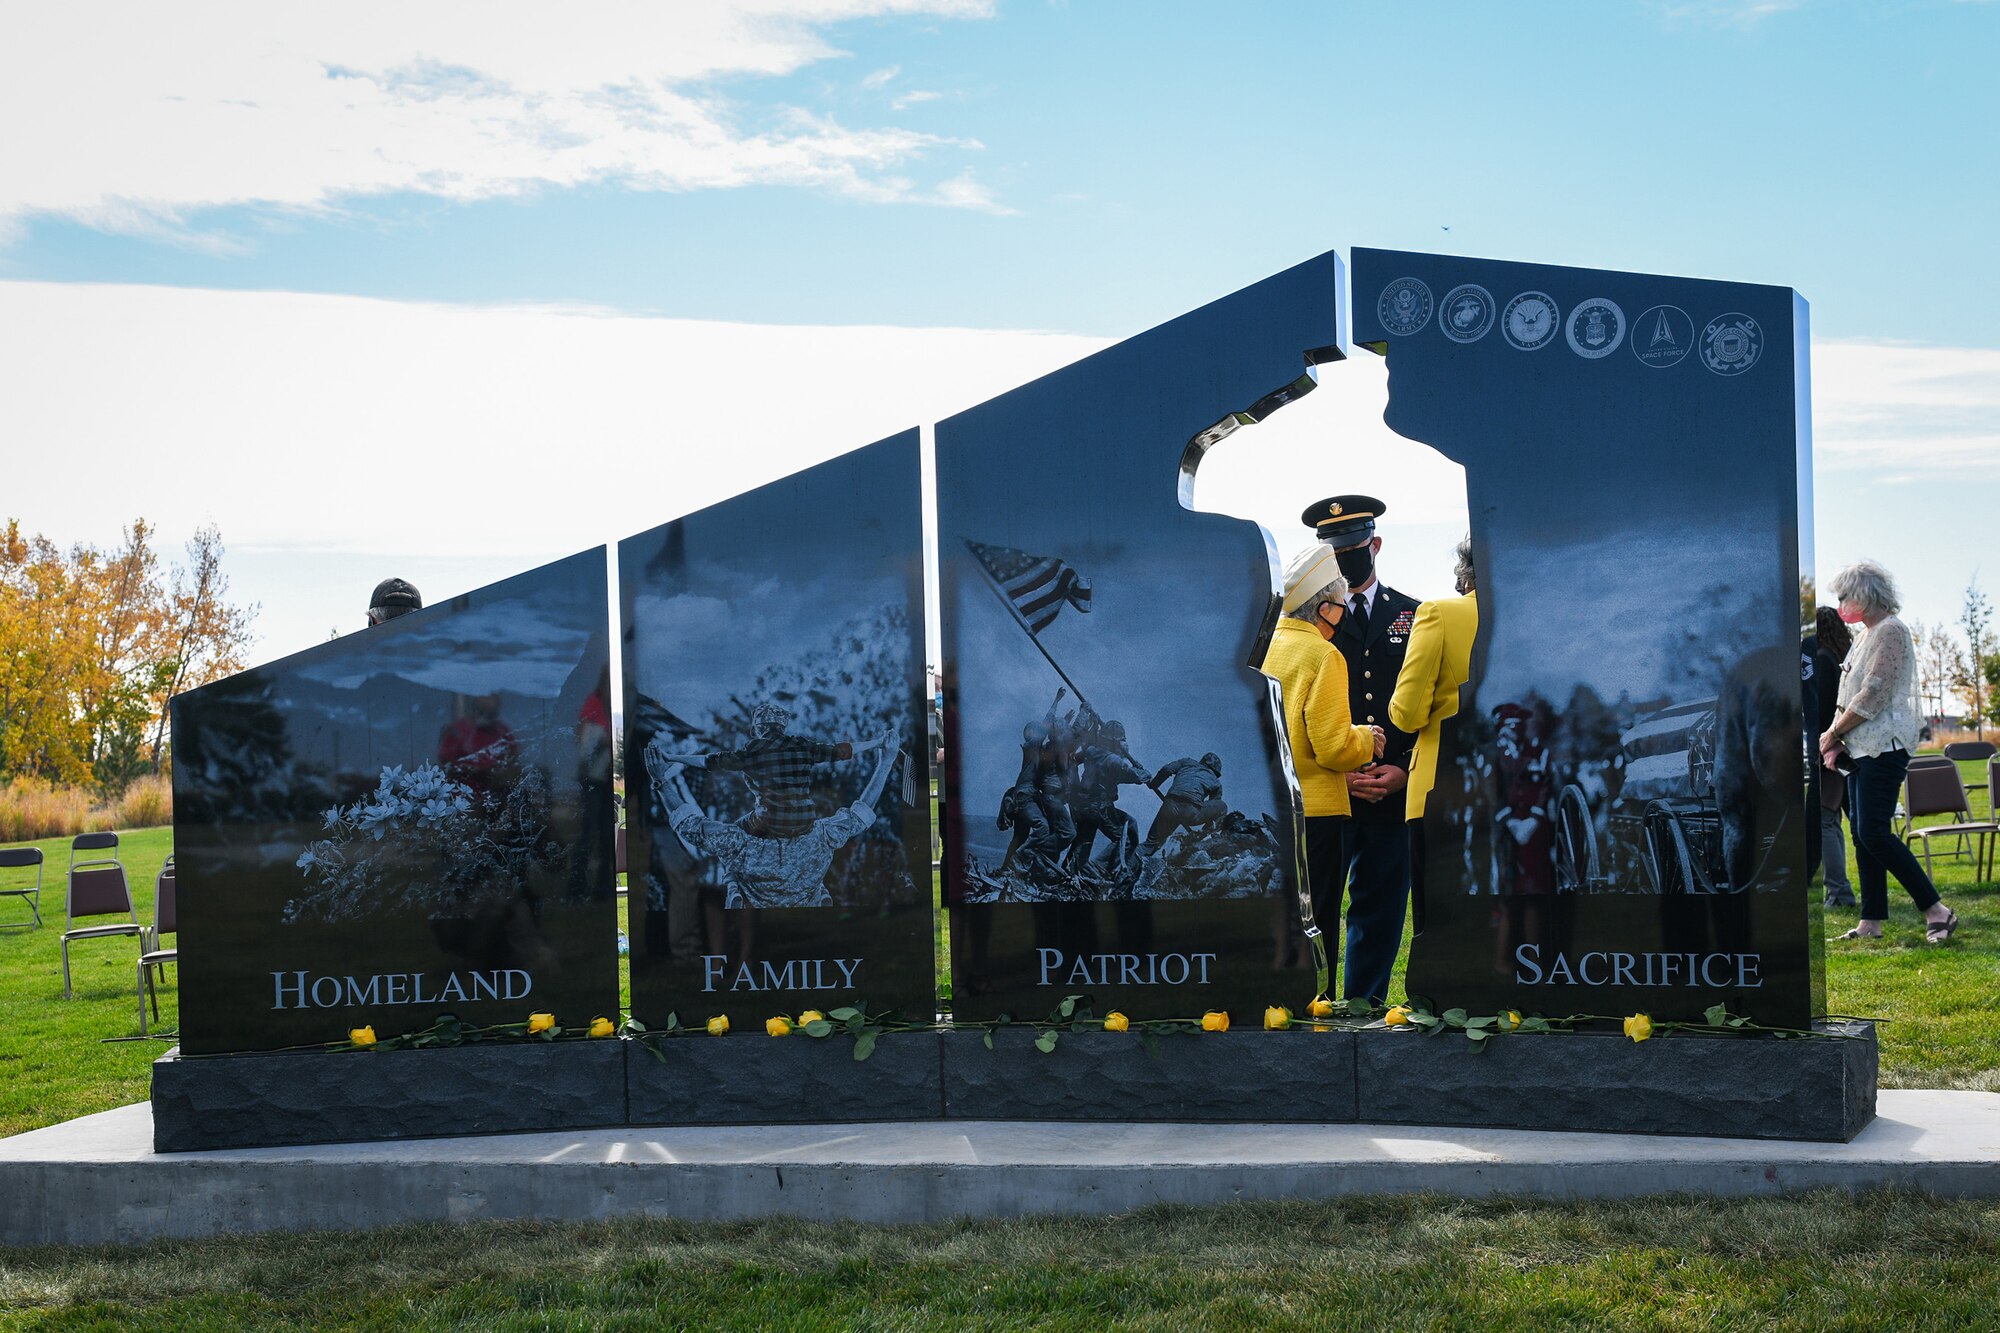 The Gold Star Families Memorial Monument was unveiled Oct. 14, 2020, at the Colorado Freedom Memorial in Aurora, Colo.